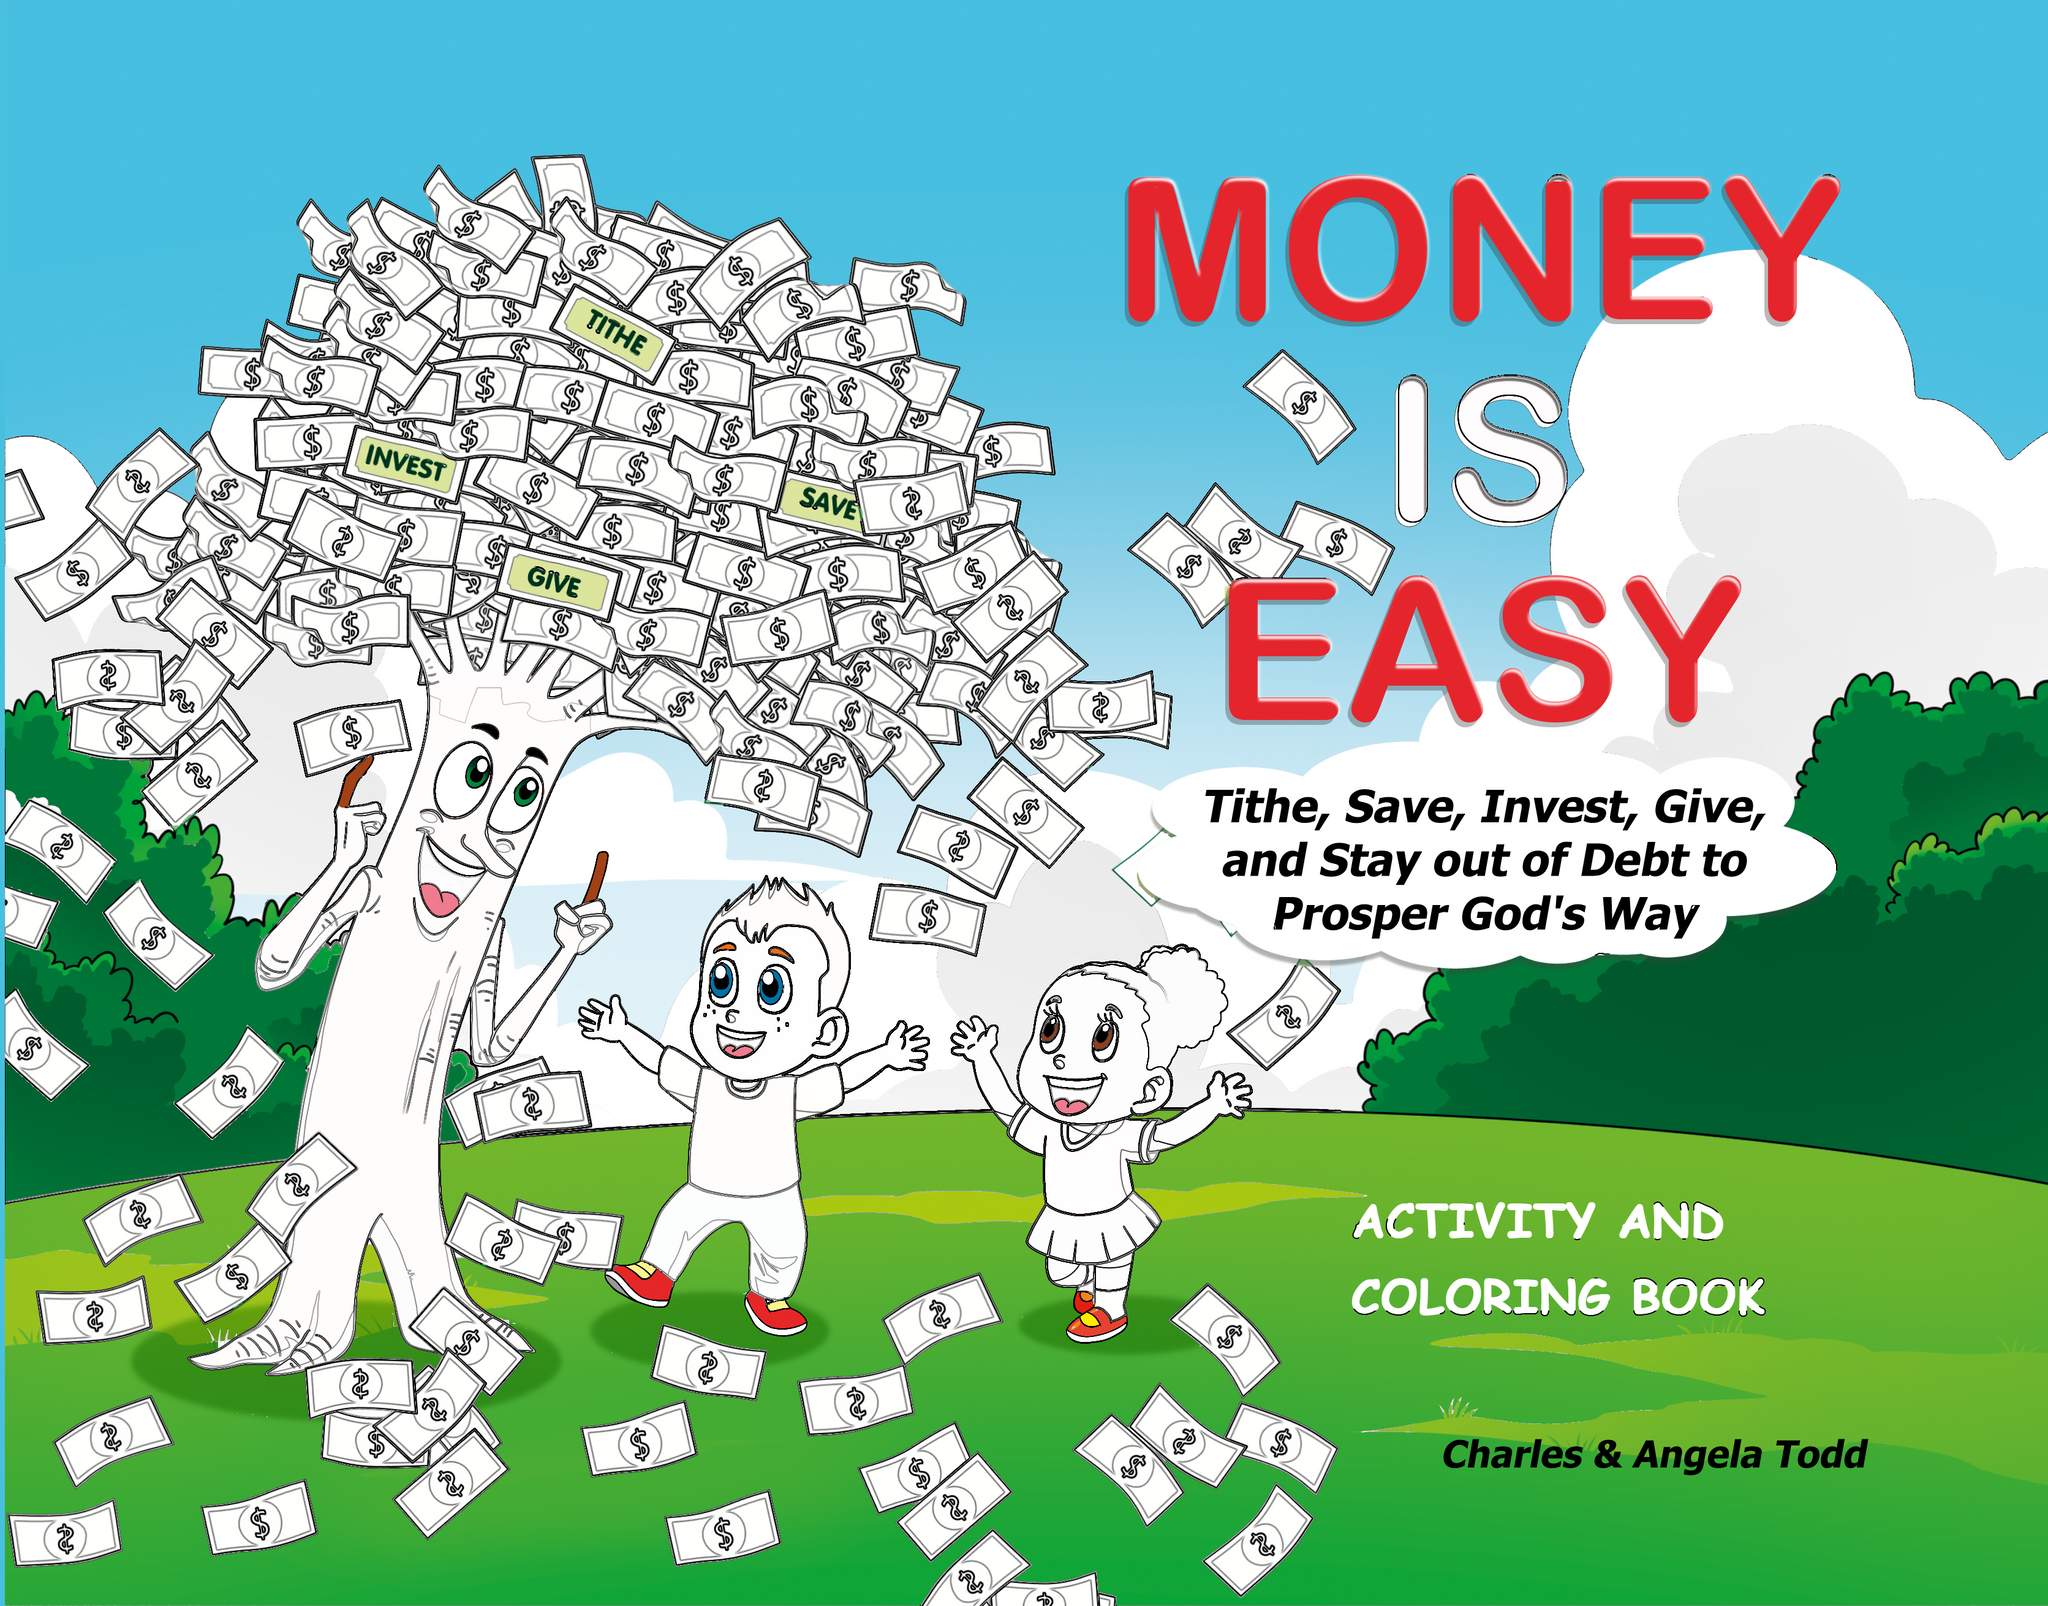 MONEY IS EASY, Activity & Coloring Book - (Paperback Landscape 11x8.5)